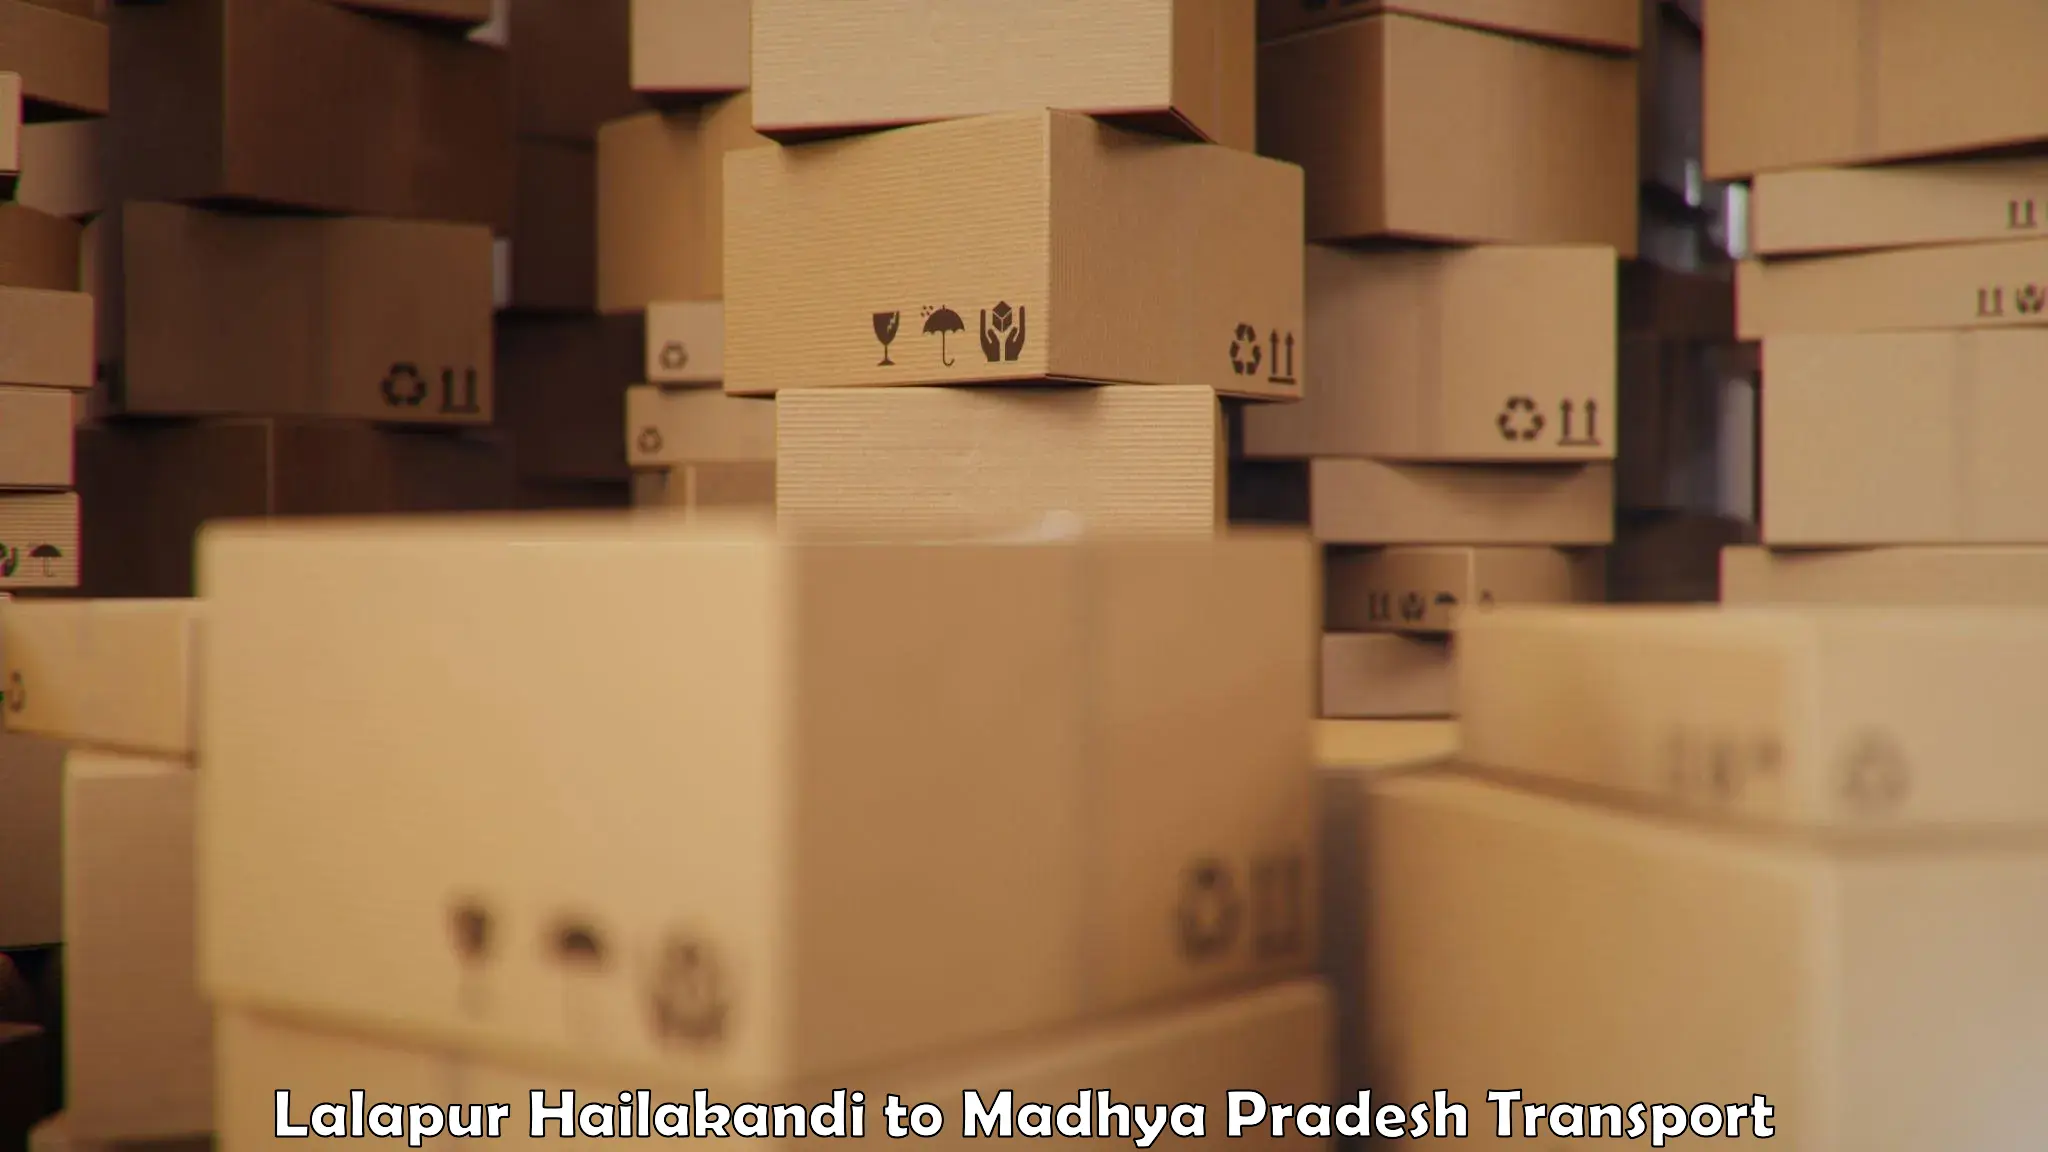 Container transport service Lalapur Hailakandi to IIT Indore